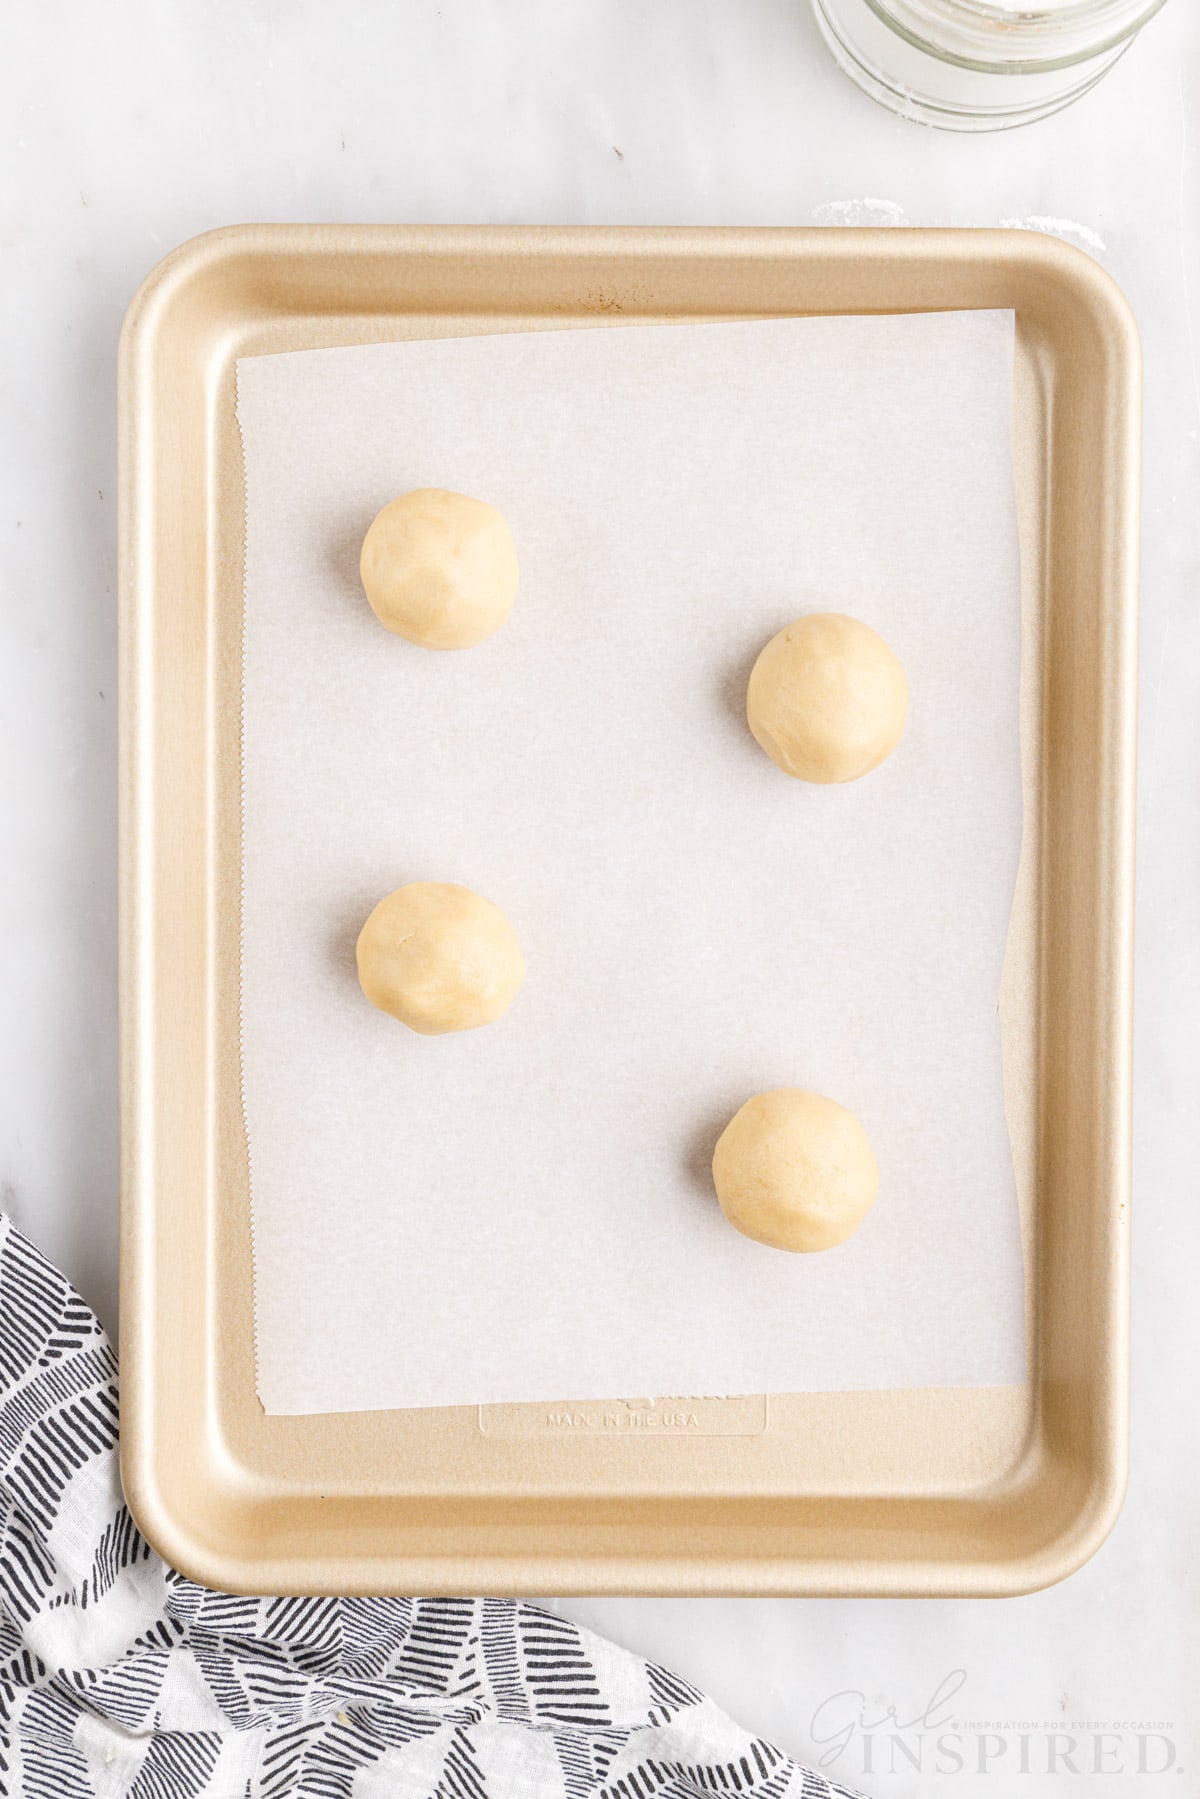 four sugar cookie dough balls on a parchment lined baking sheet